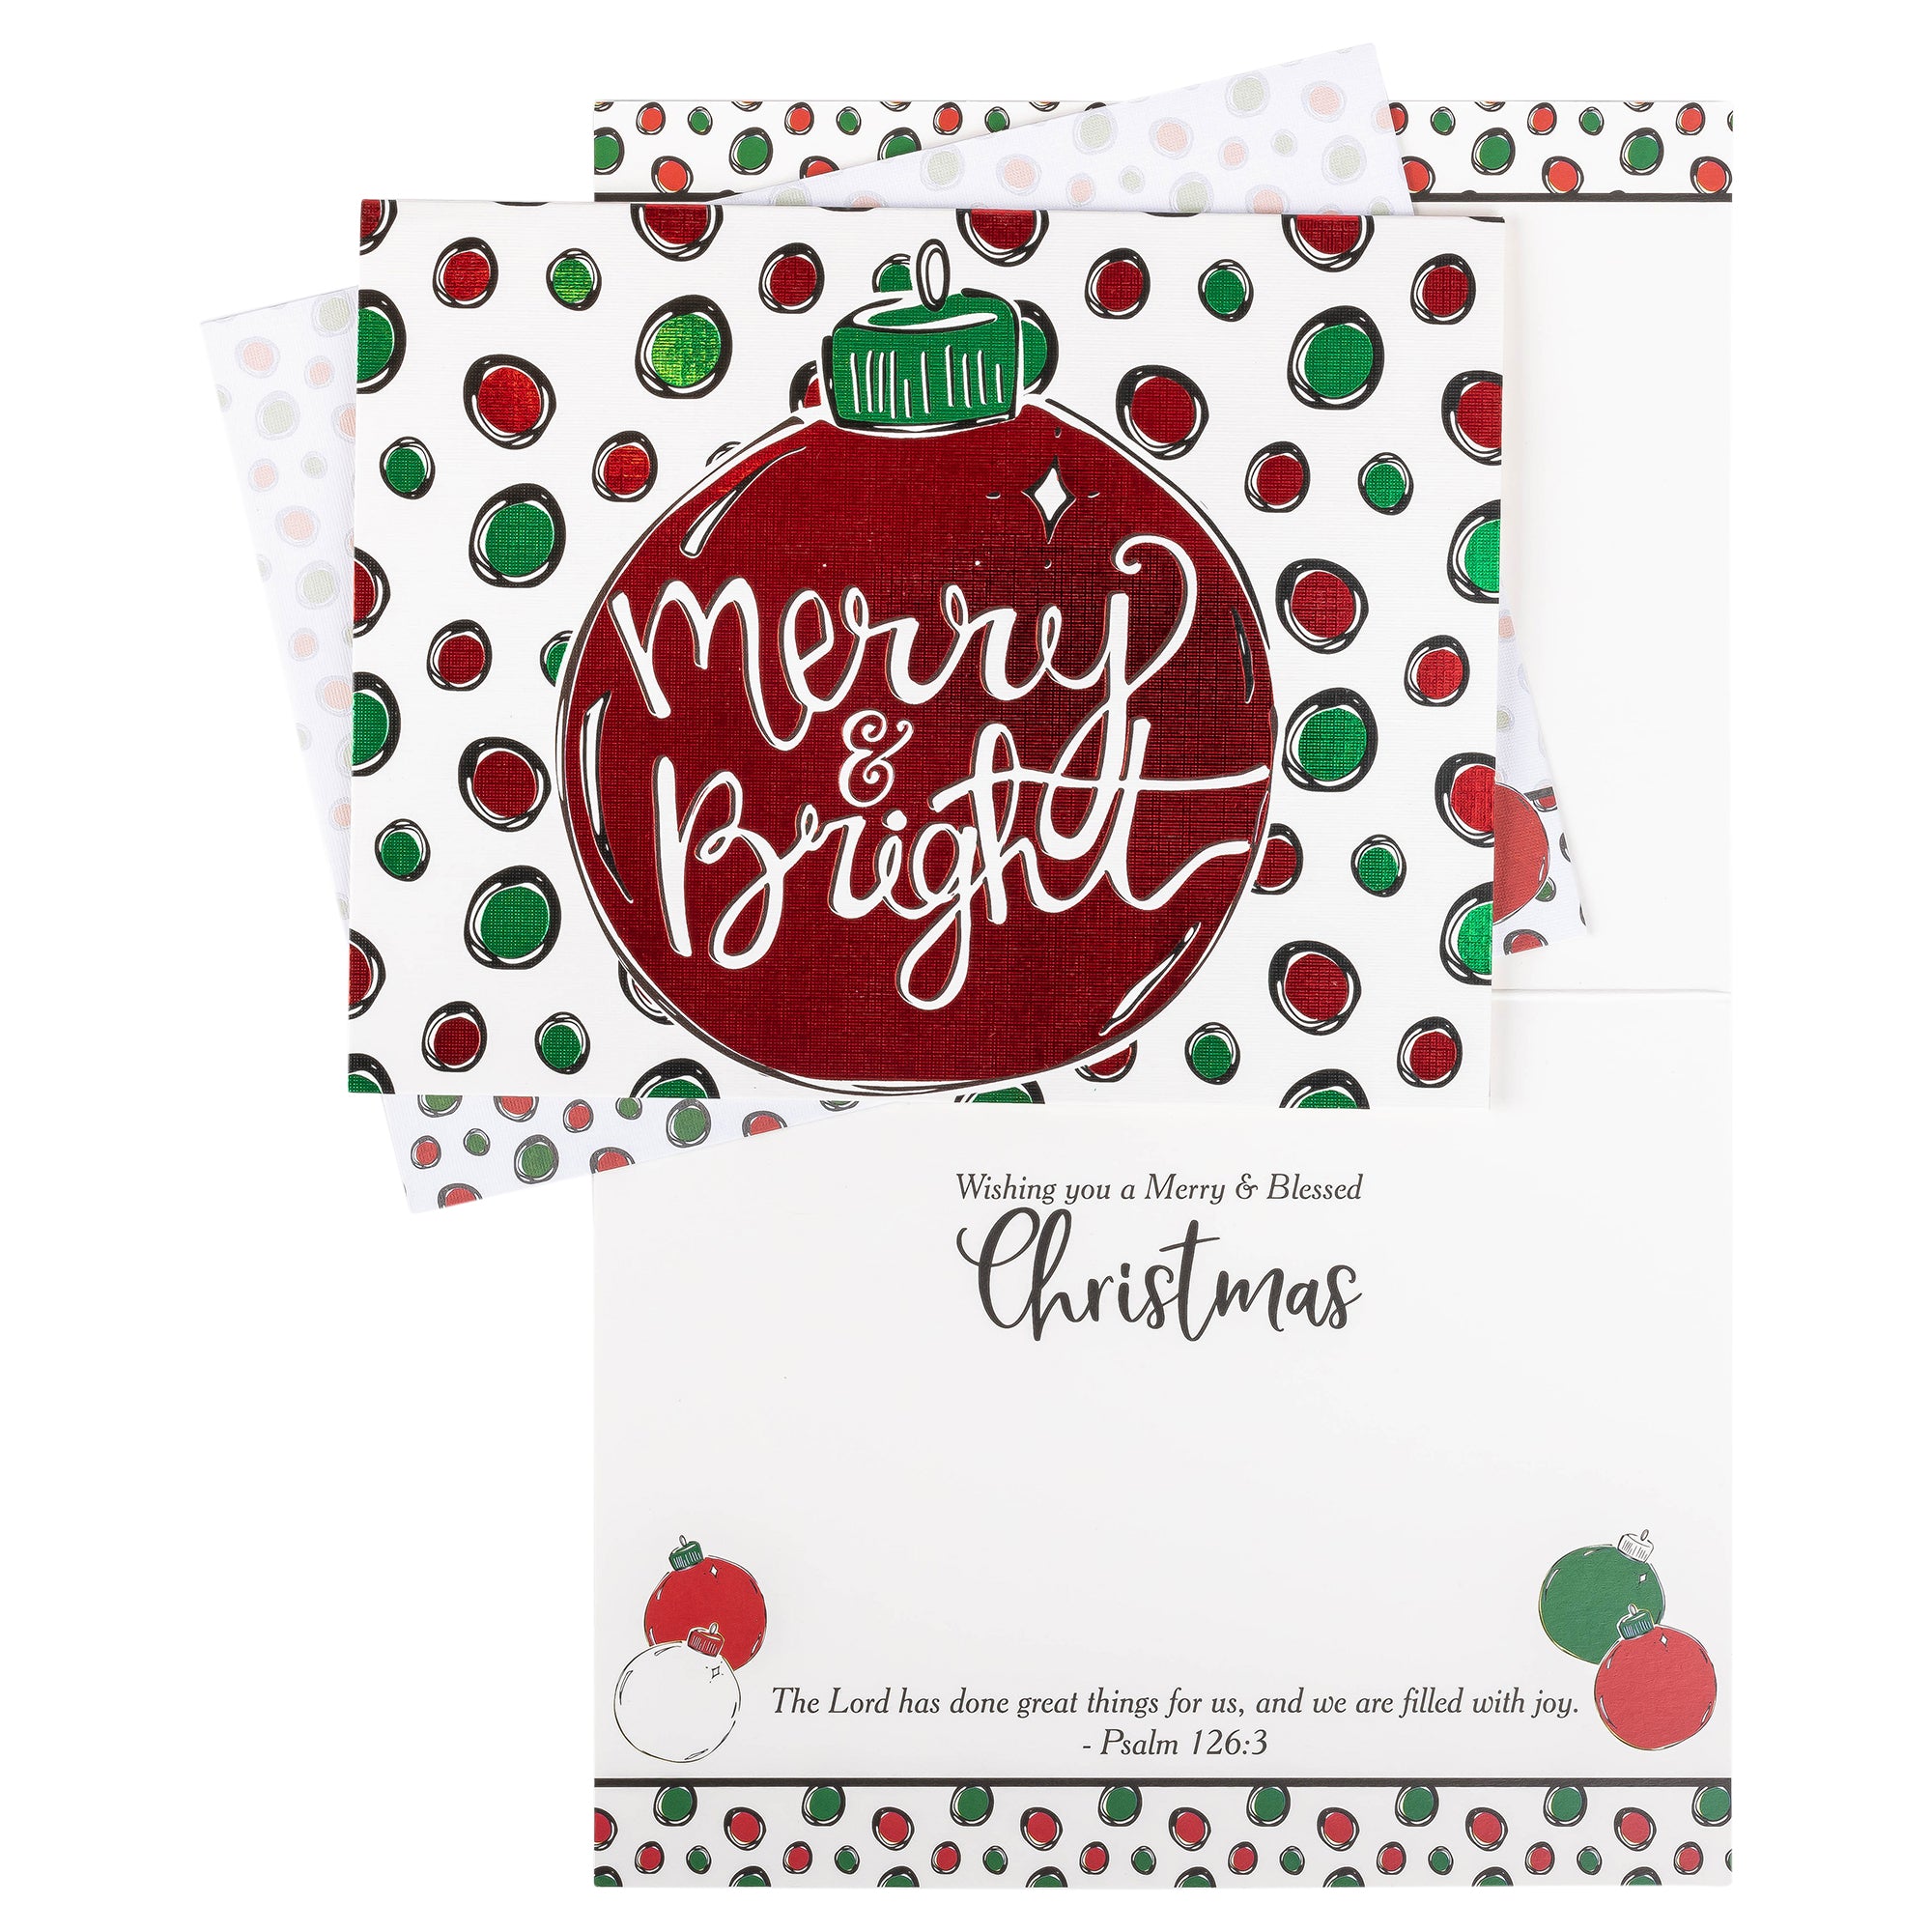 Boxed Christmas Cards: Merry & Bright Ornament